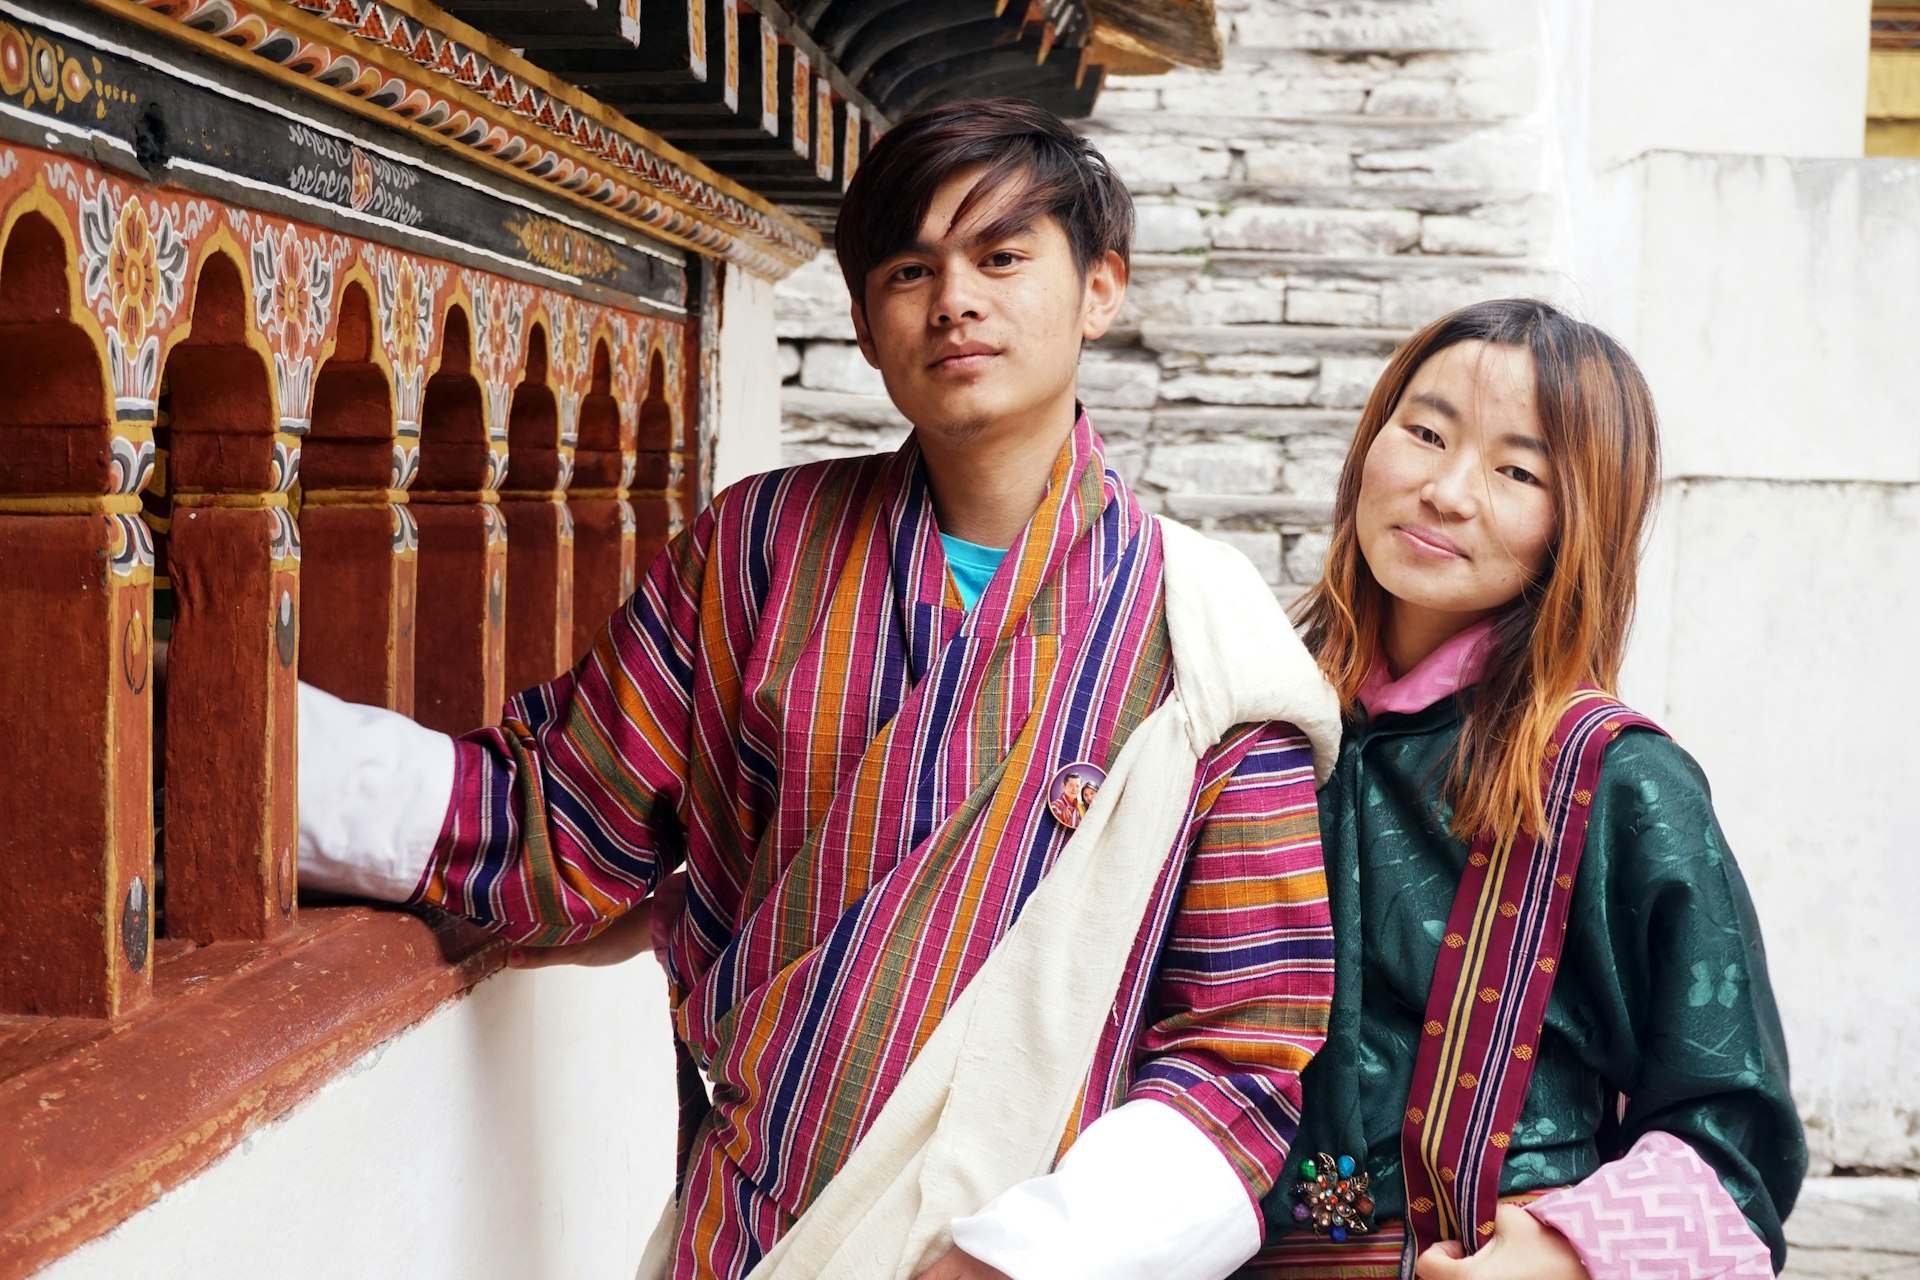 A young Bhutanese couple wearing traditional clothing 'Gho' and 'Kira'